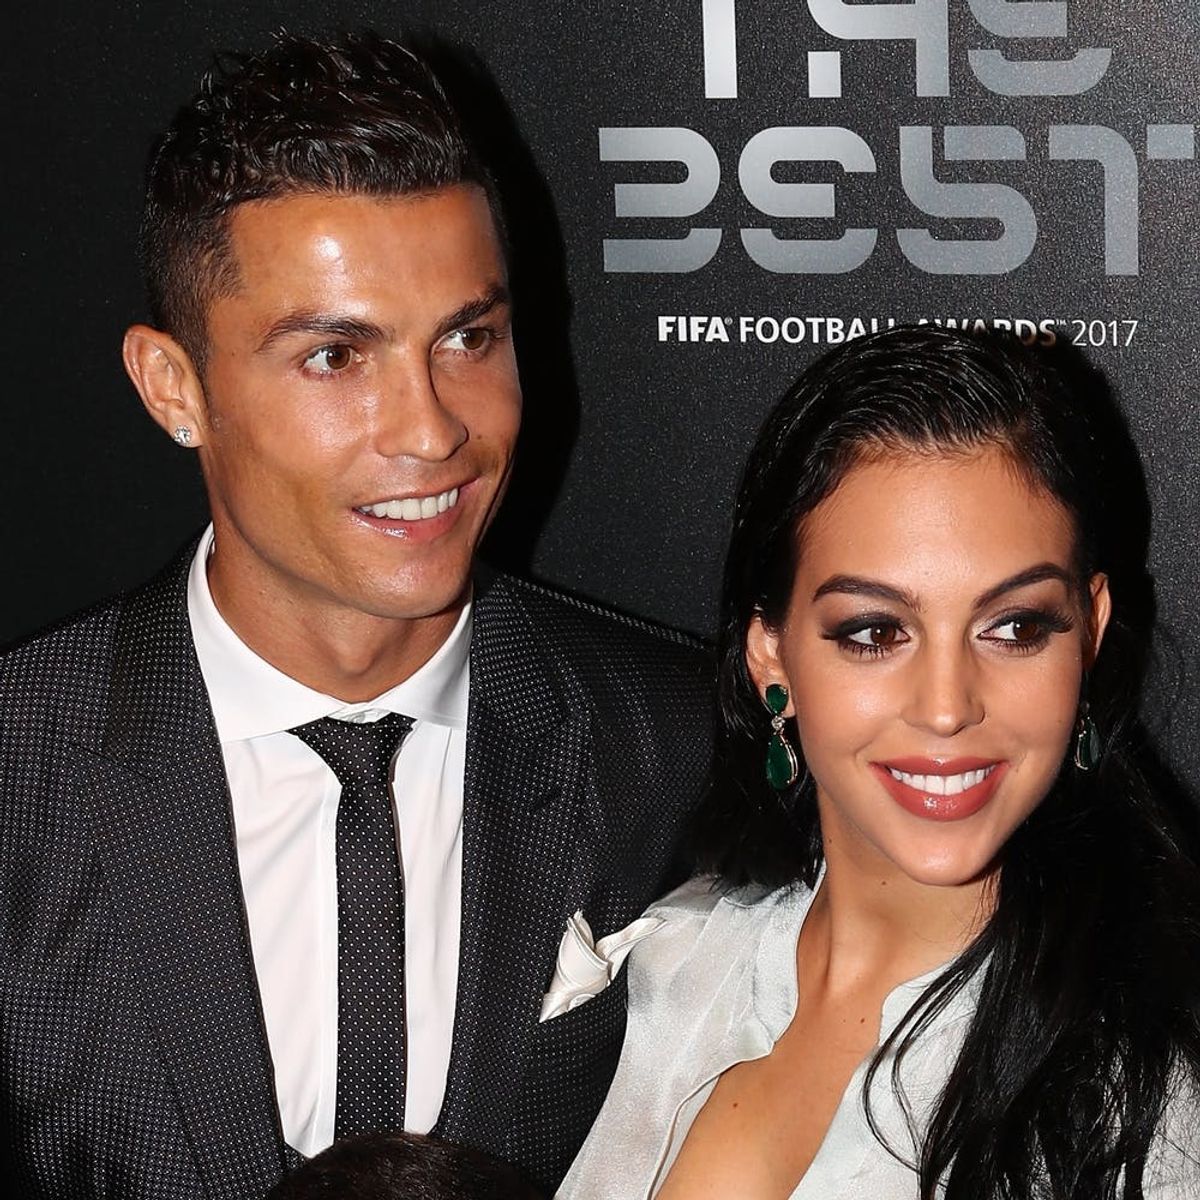 Cristiano Ronaldo Has Welcomed His 4th Child With Girlfriend Georgina Rodríguez